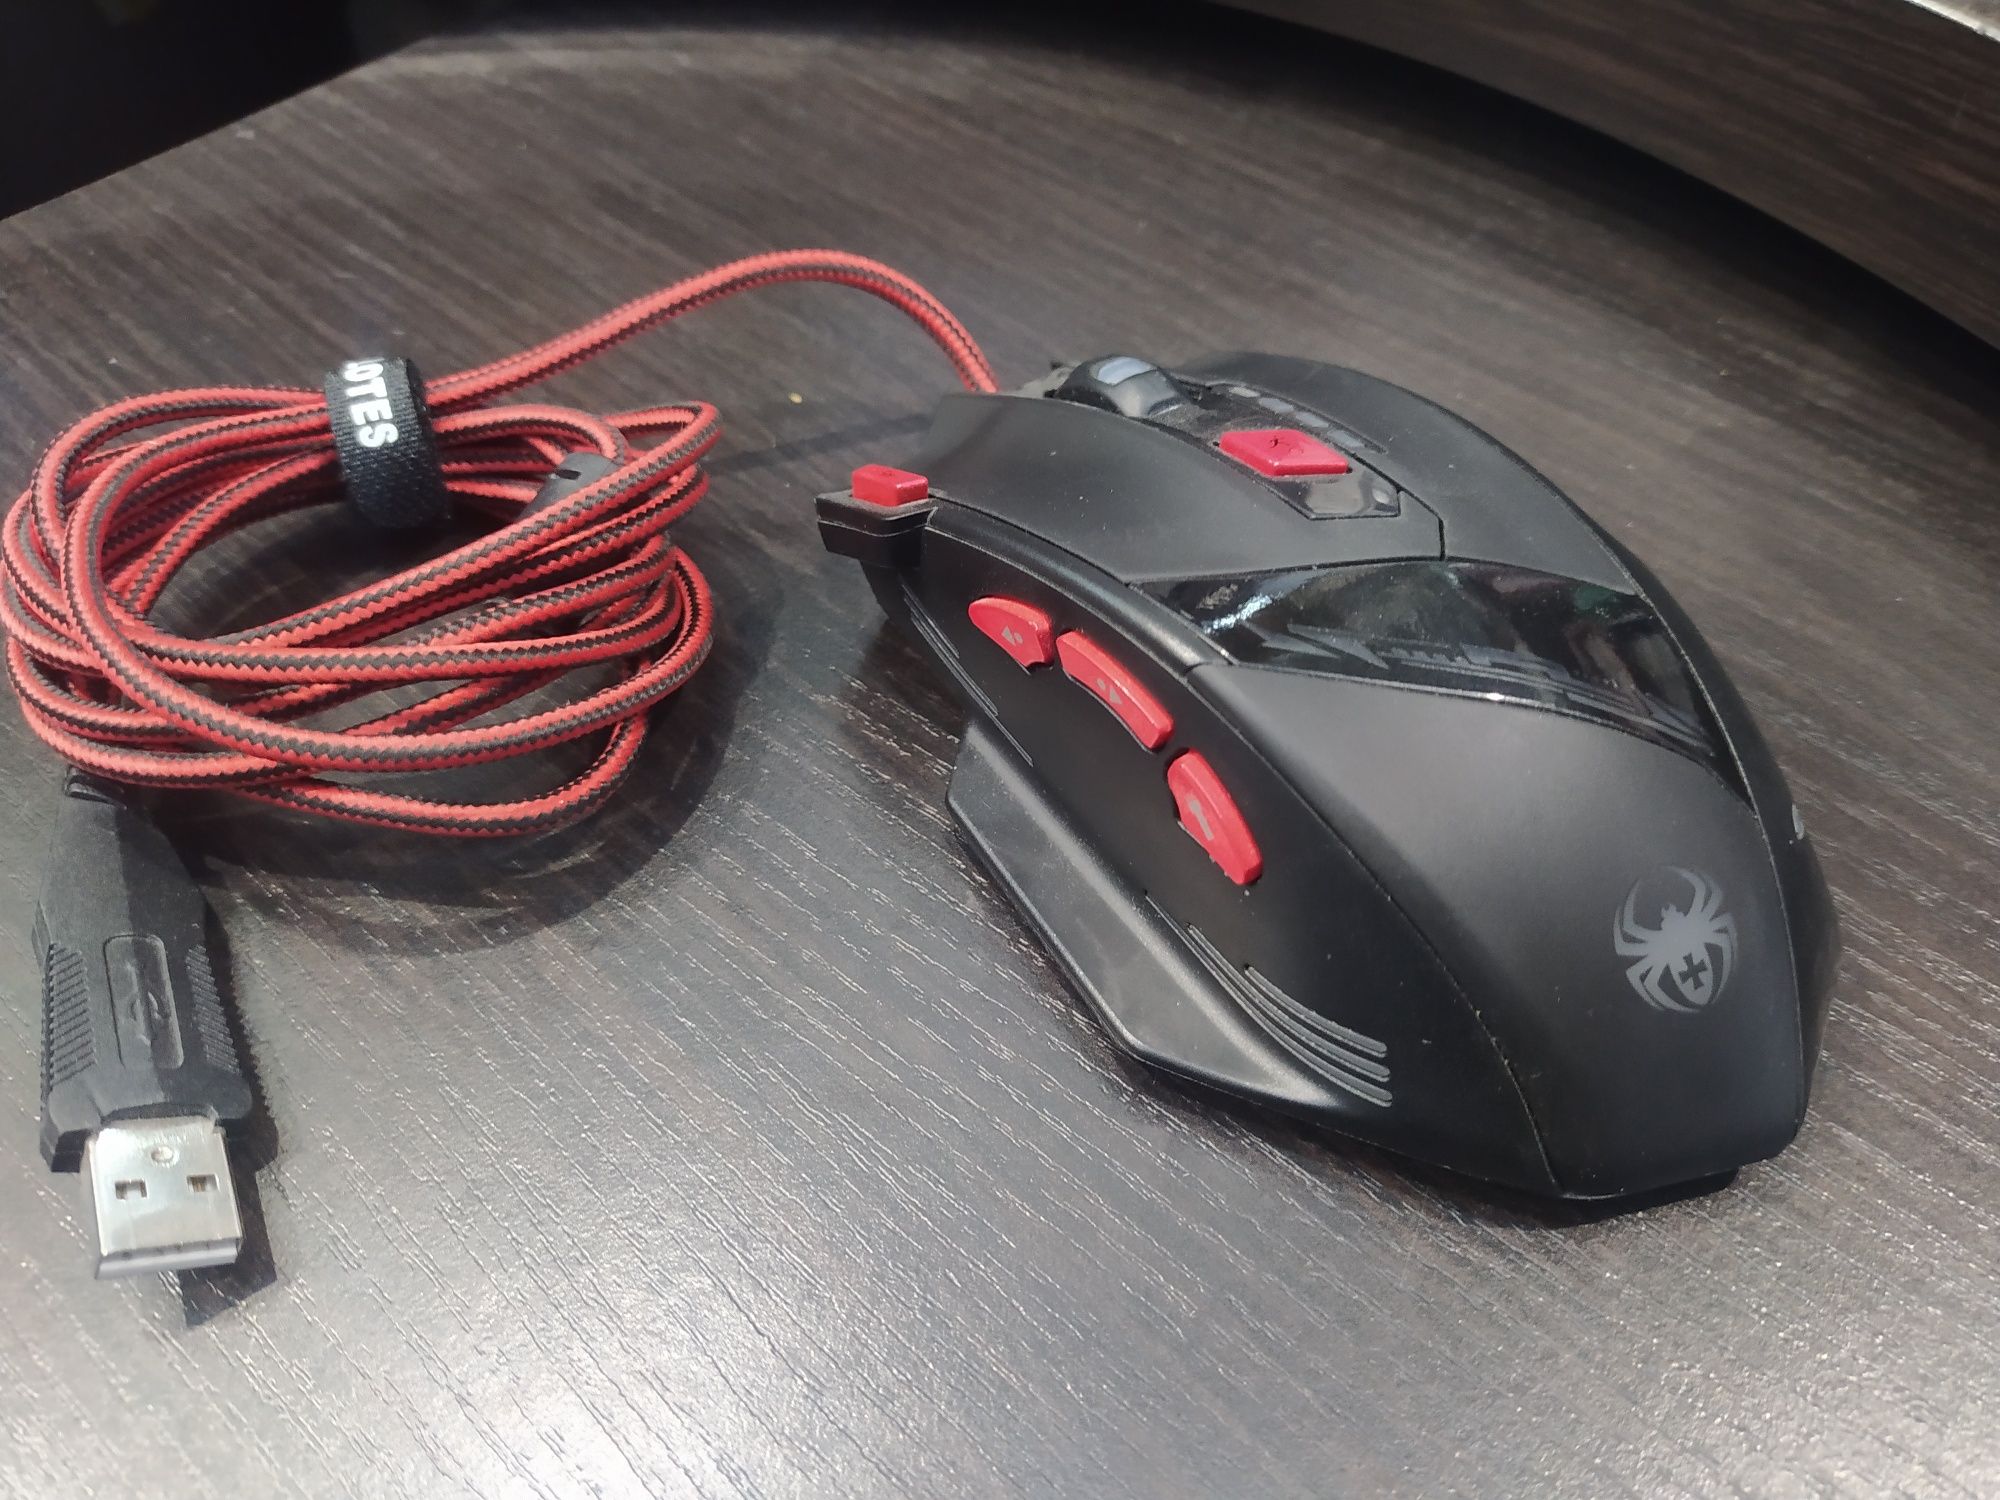 Zelotes gaming mouse t-90